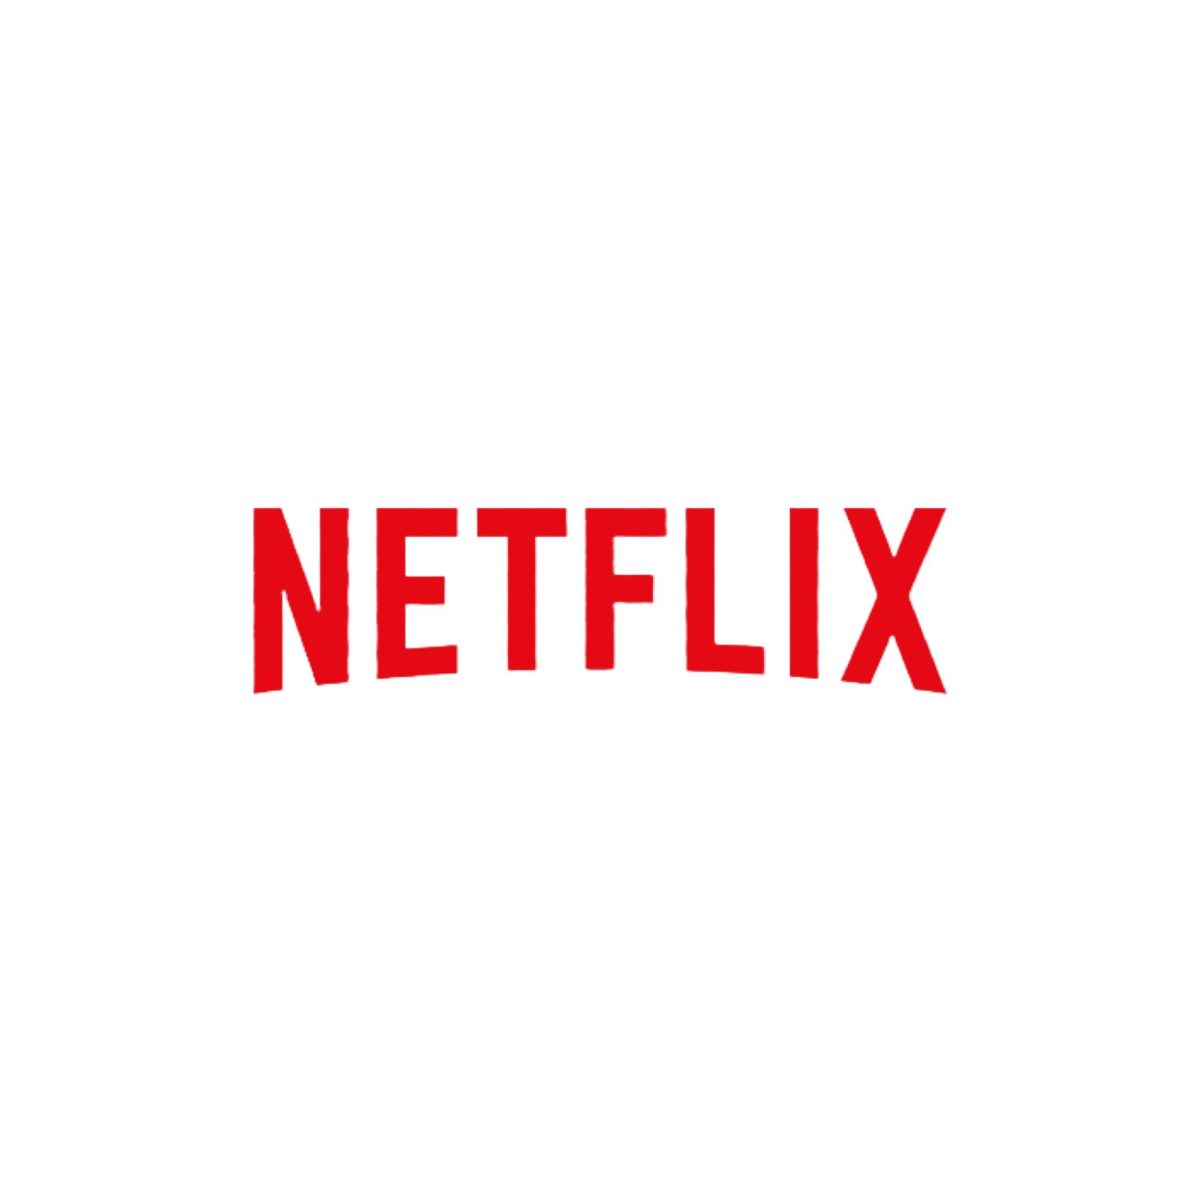 Watching Netflix shows can be very therapeutic, but when your favorite show is canceled it can be rough. Netflix Logomark by Netflix Inc. is licensed under Public Domain.